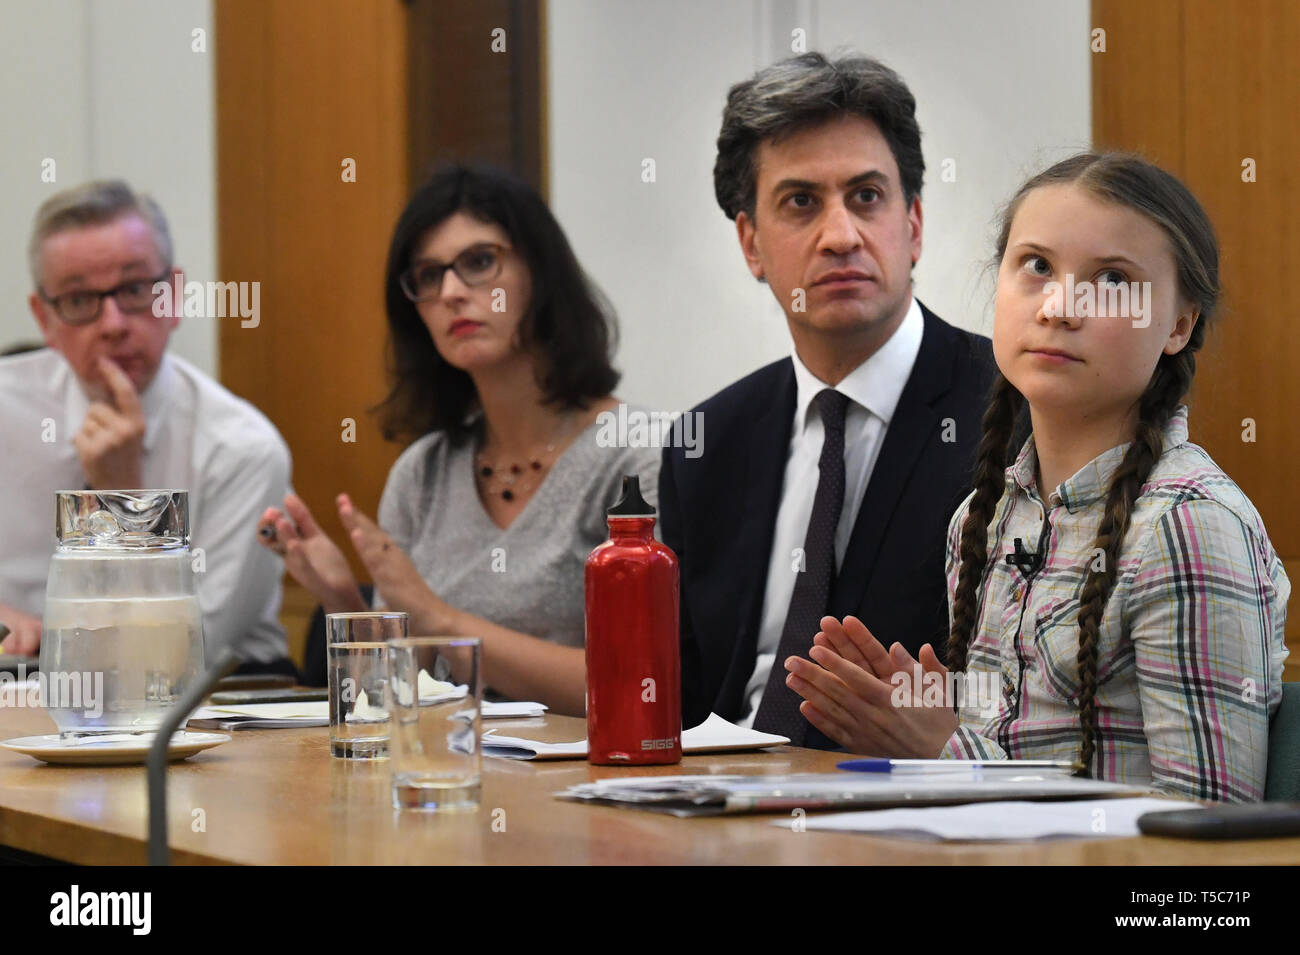 Environment Secretary Michael Gove (left), Former Labour leader Ed Miliband (2nd right) and Swedish climate activist Greta Thunberg (right) at the House of Commons in Westminster, London, to discuss the need for cross-party action to address the climate crisis. Stock Photo